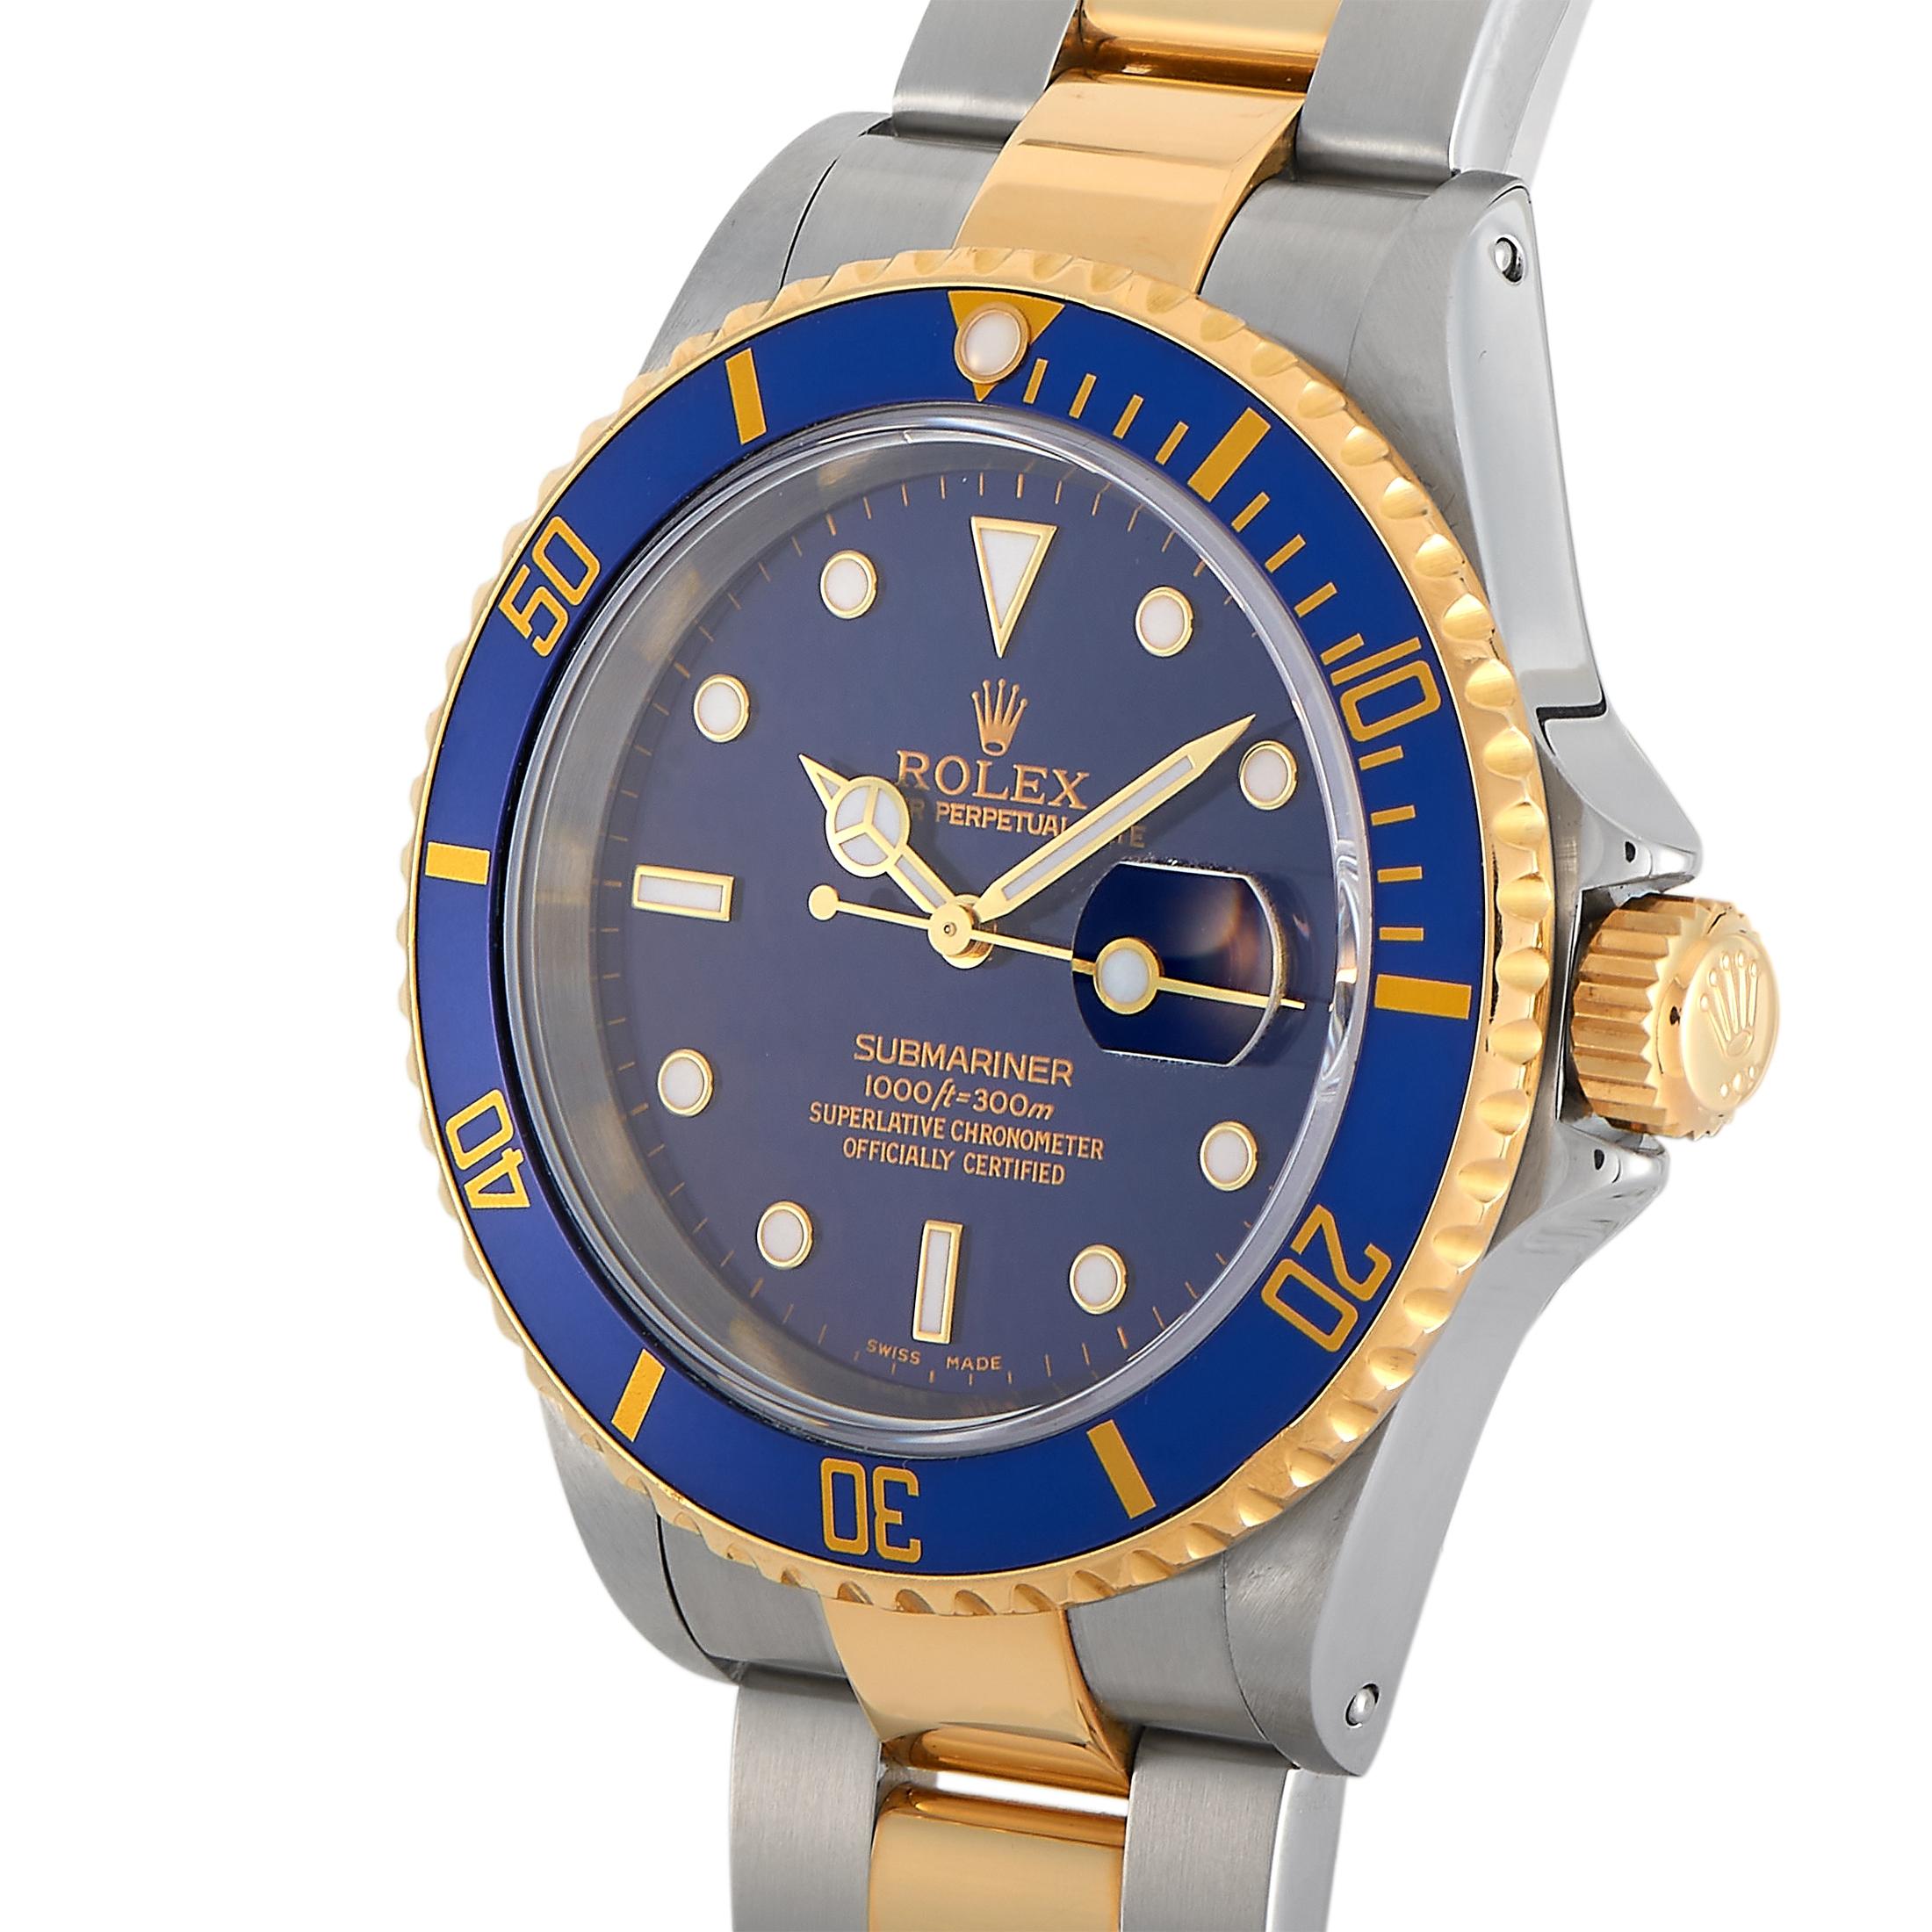 Look again. The Rolex Submariner Self-Winding Watch 16613 displays not just a standard blue dial. Look closer and you'll see a sunburst effect that gives the electric blue dial a shimmering iridescence. Given the extra shine, this men's diver watch